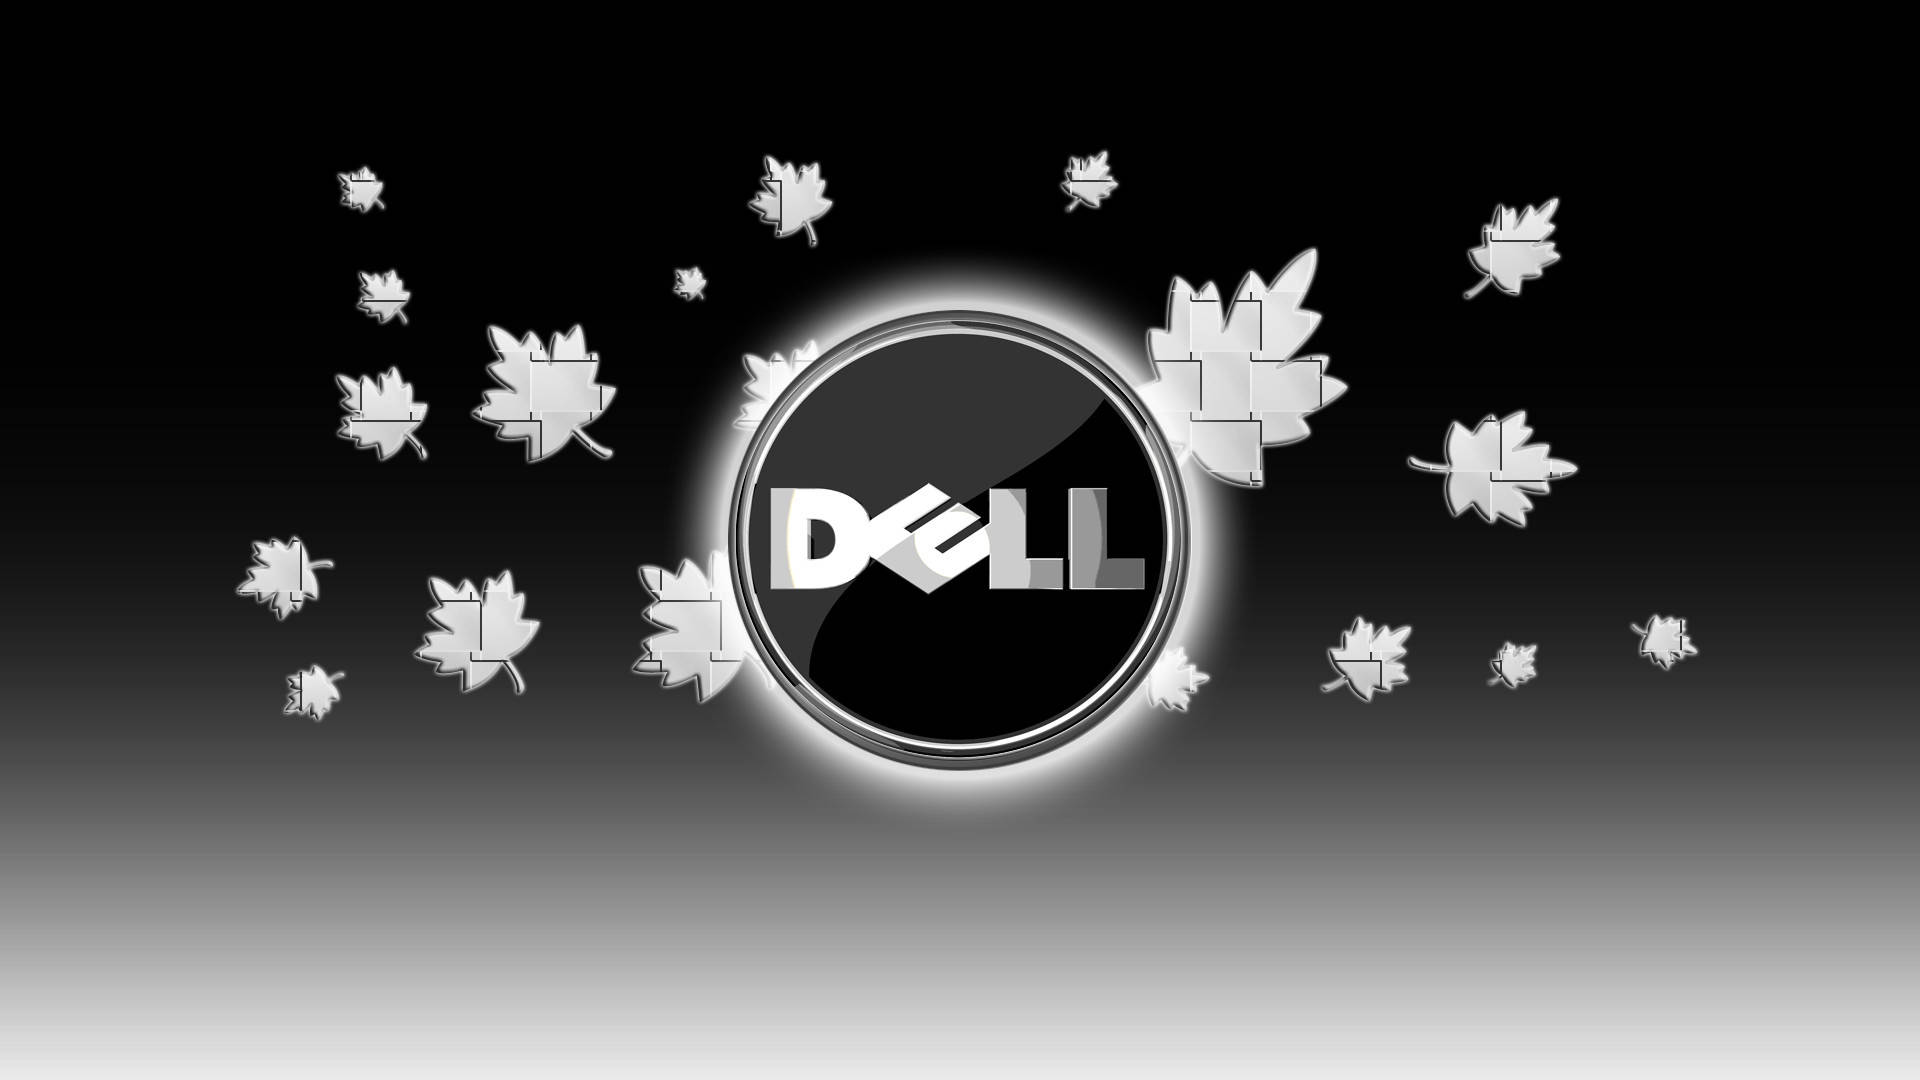 Fall Leaves And Dell Hd Logo Wallpaper